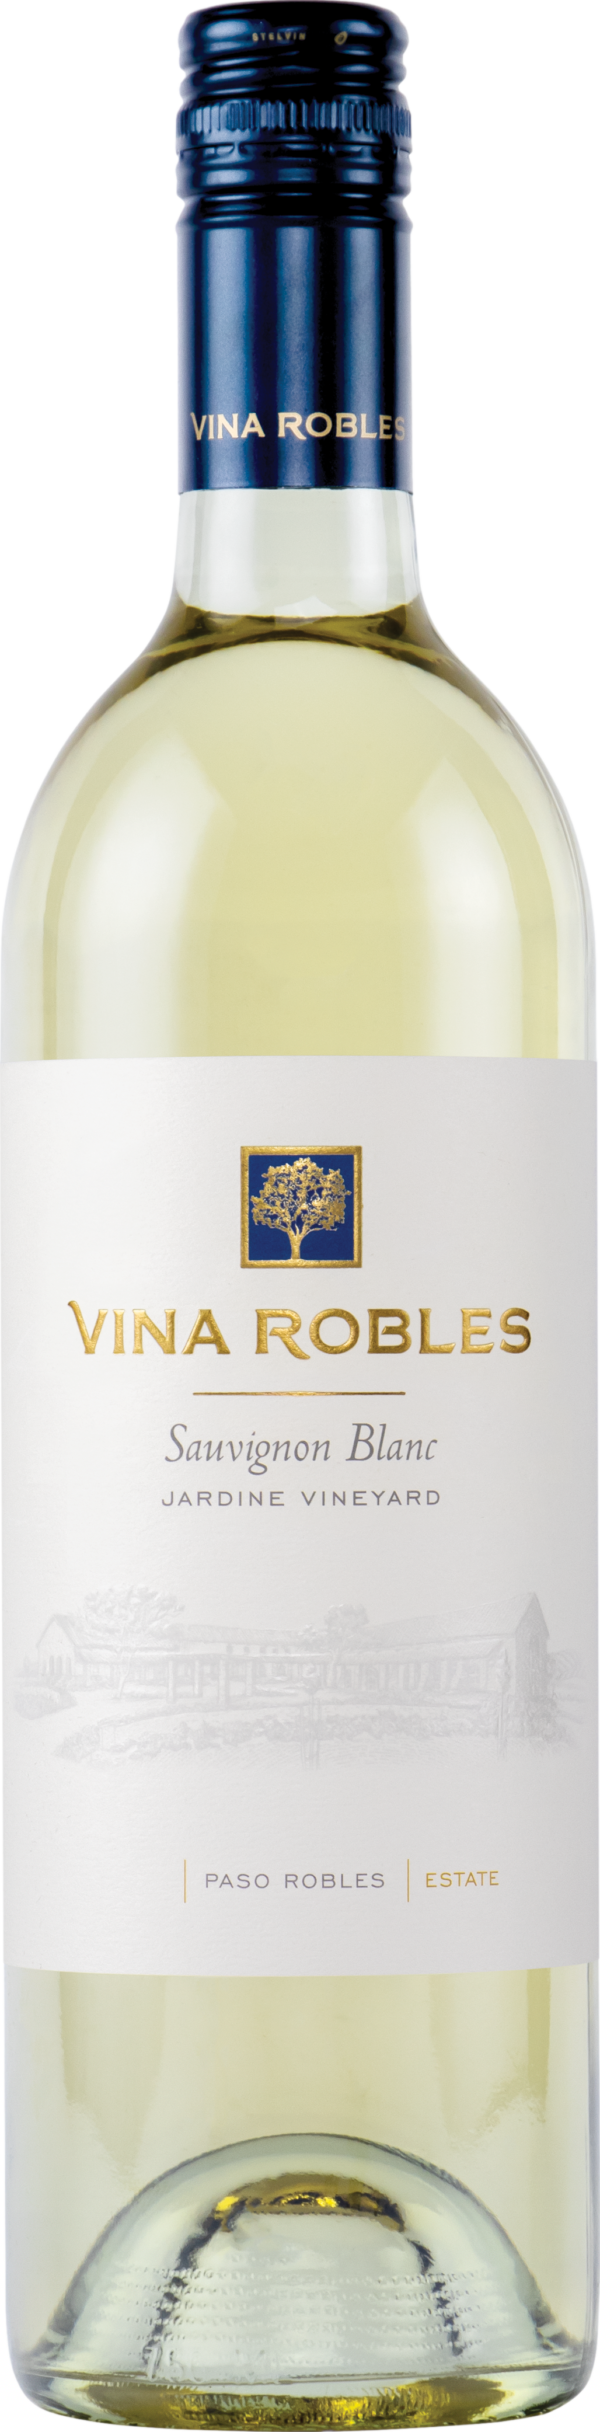 Product image of Vina Robles Sauvignon Blanc 2021 from 8wines